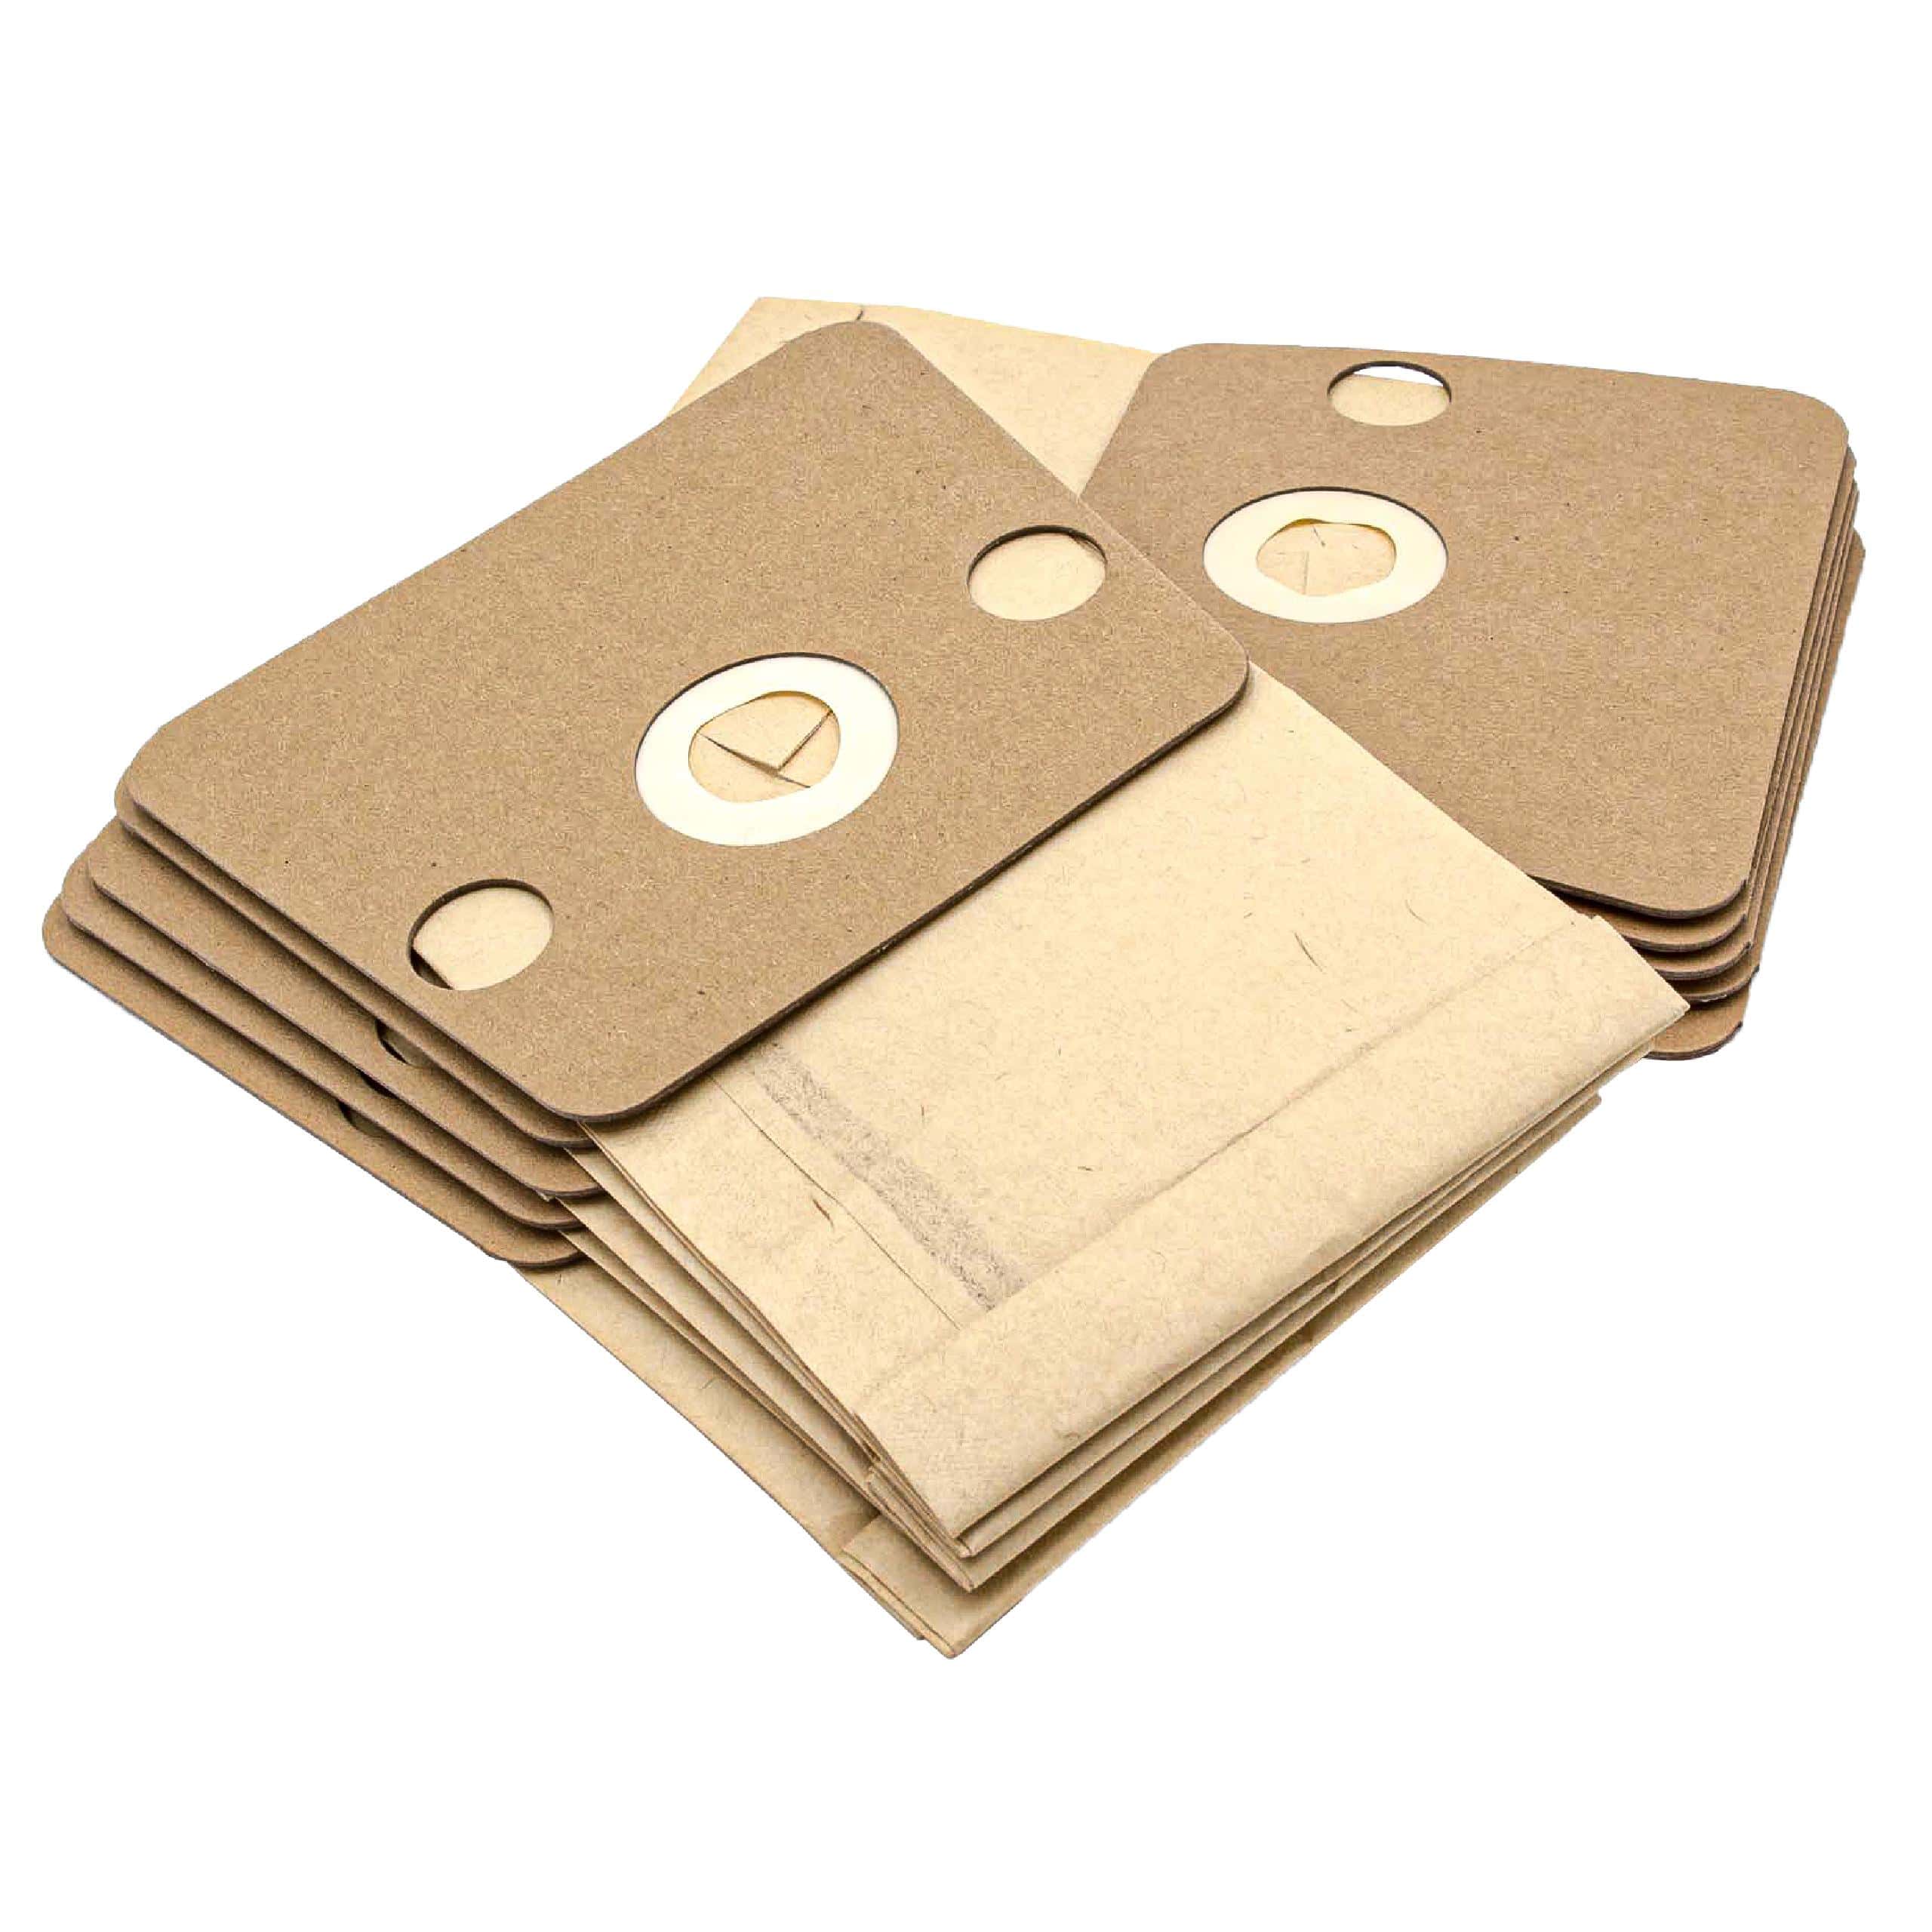 10x Vacuum Cleaner Bag suitable for Neo - paper